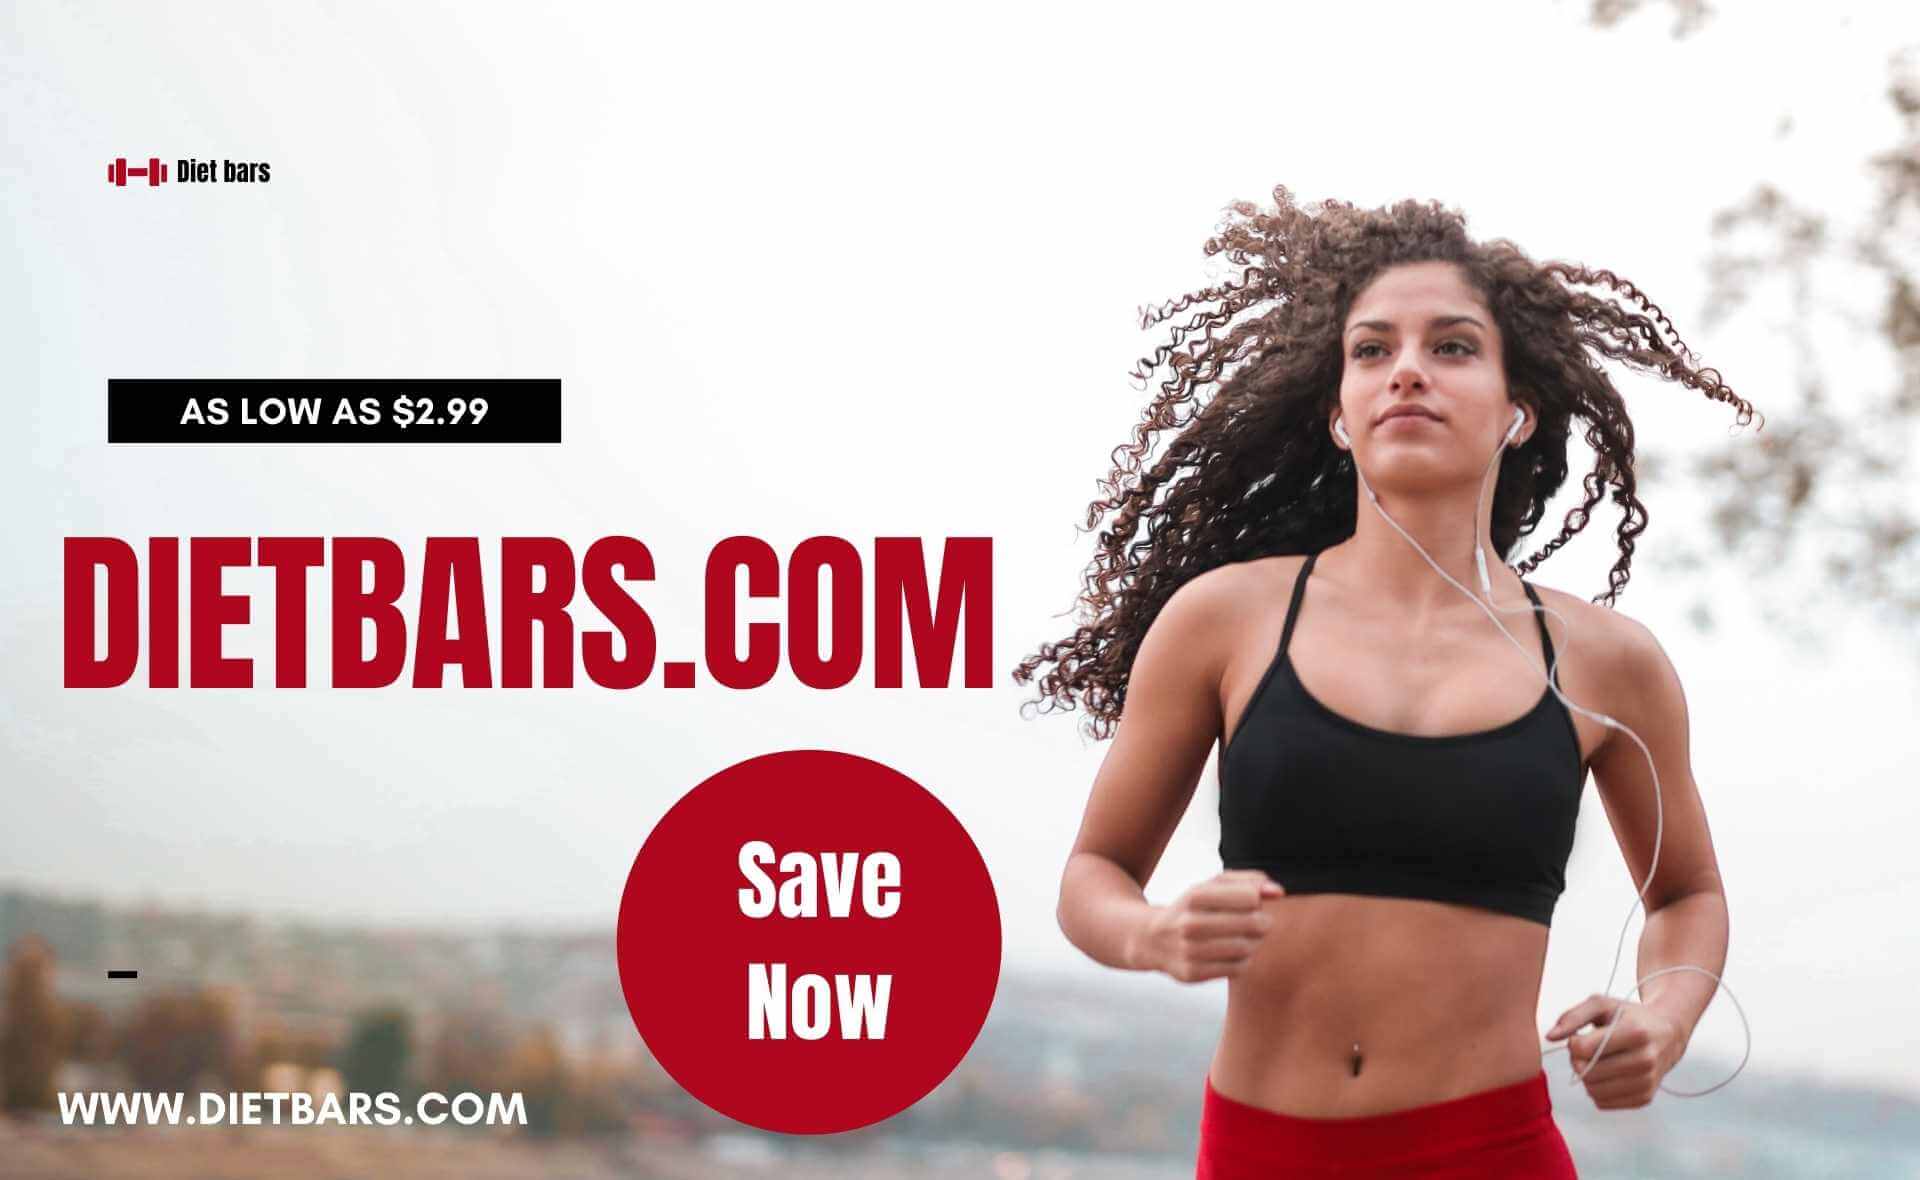 Diet Bars save now